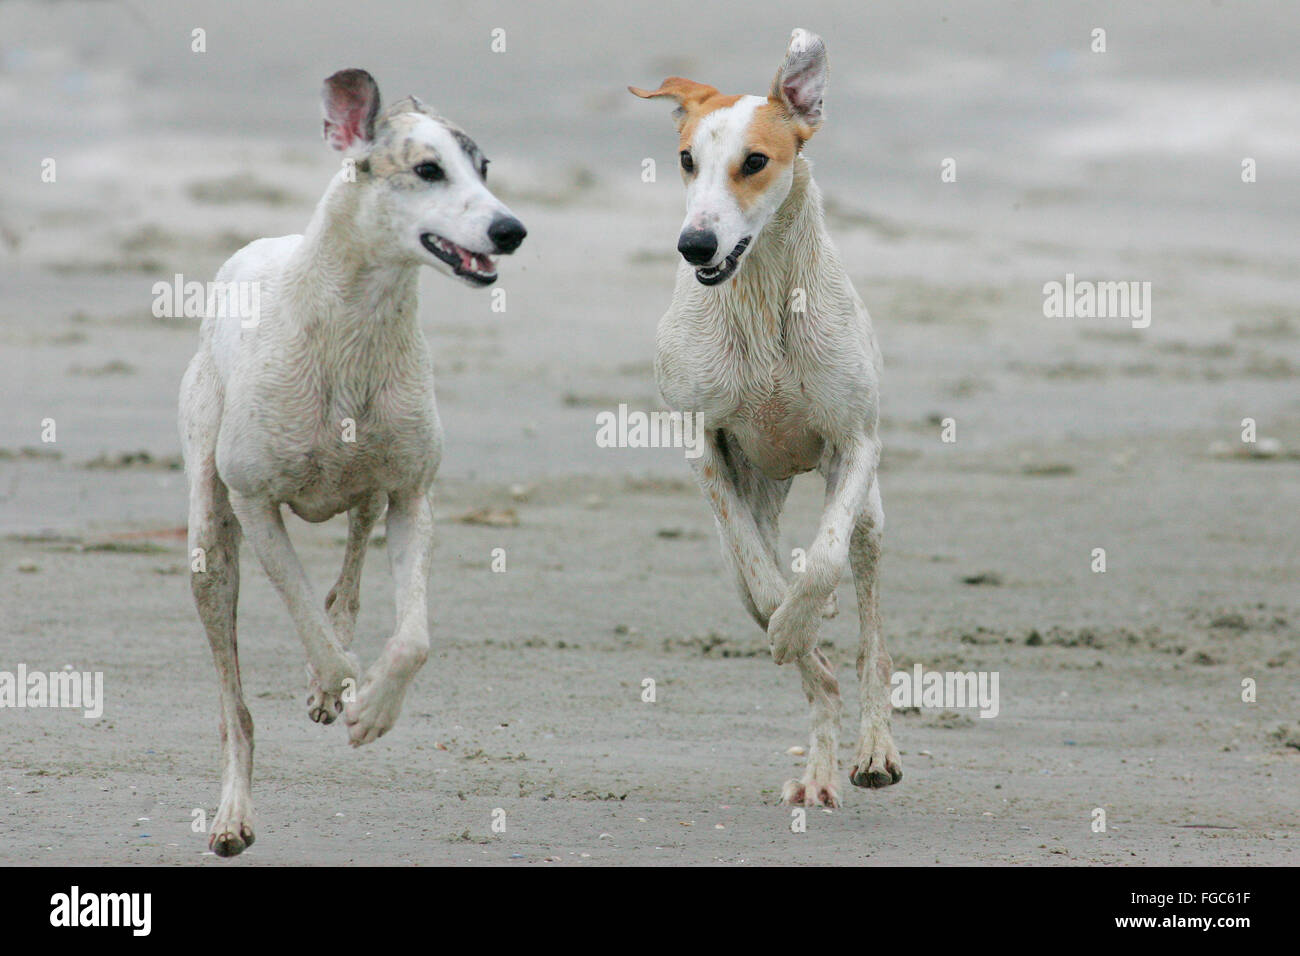 Magyar Agar. Two adults running on a beach. Germany Stock Photo